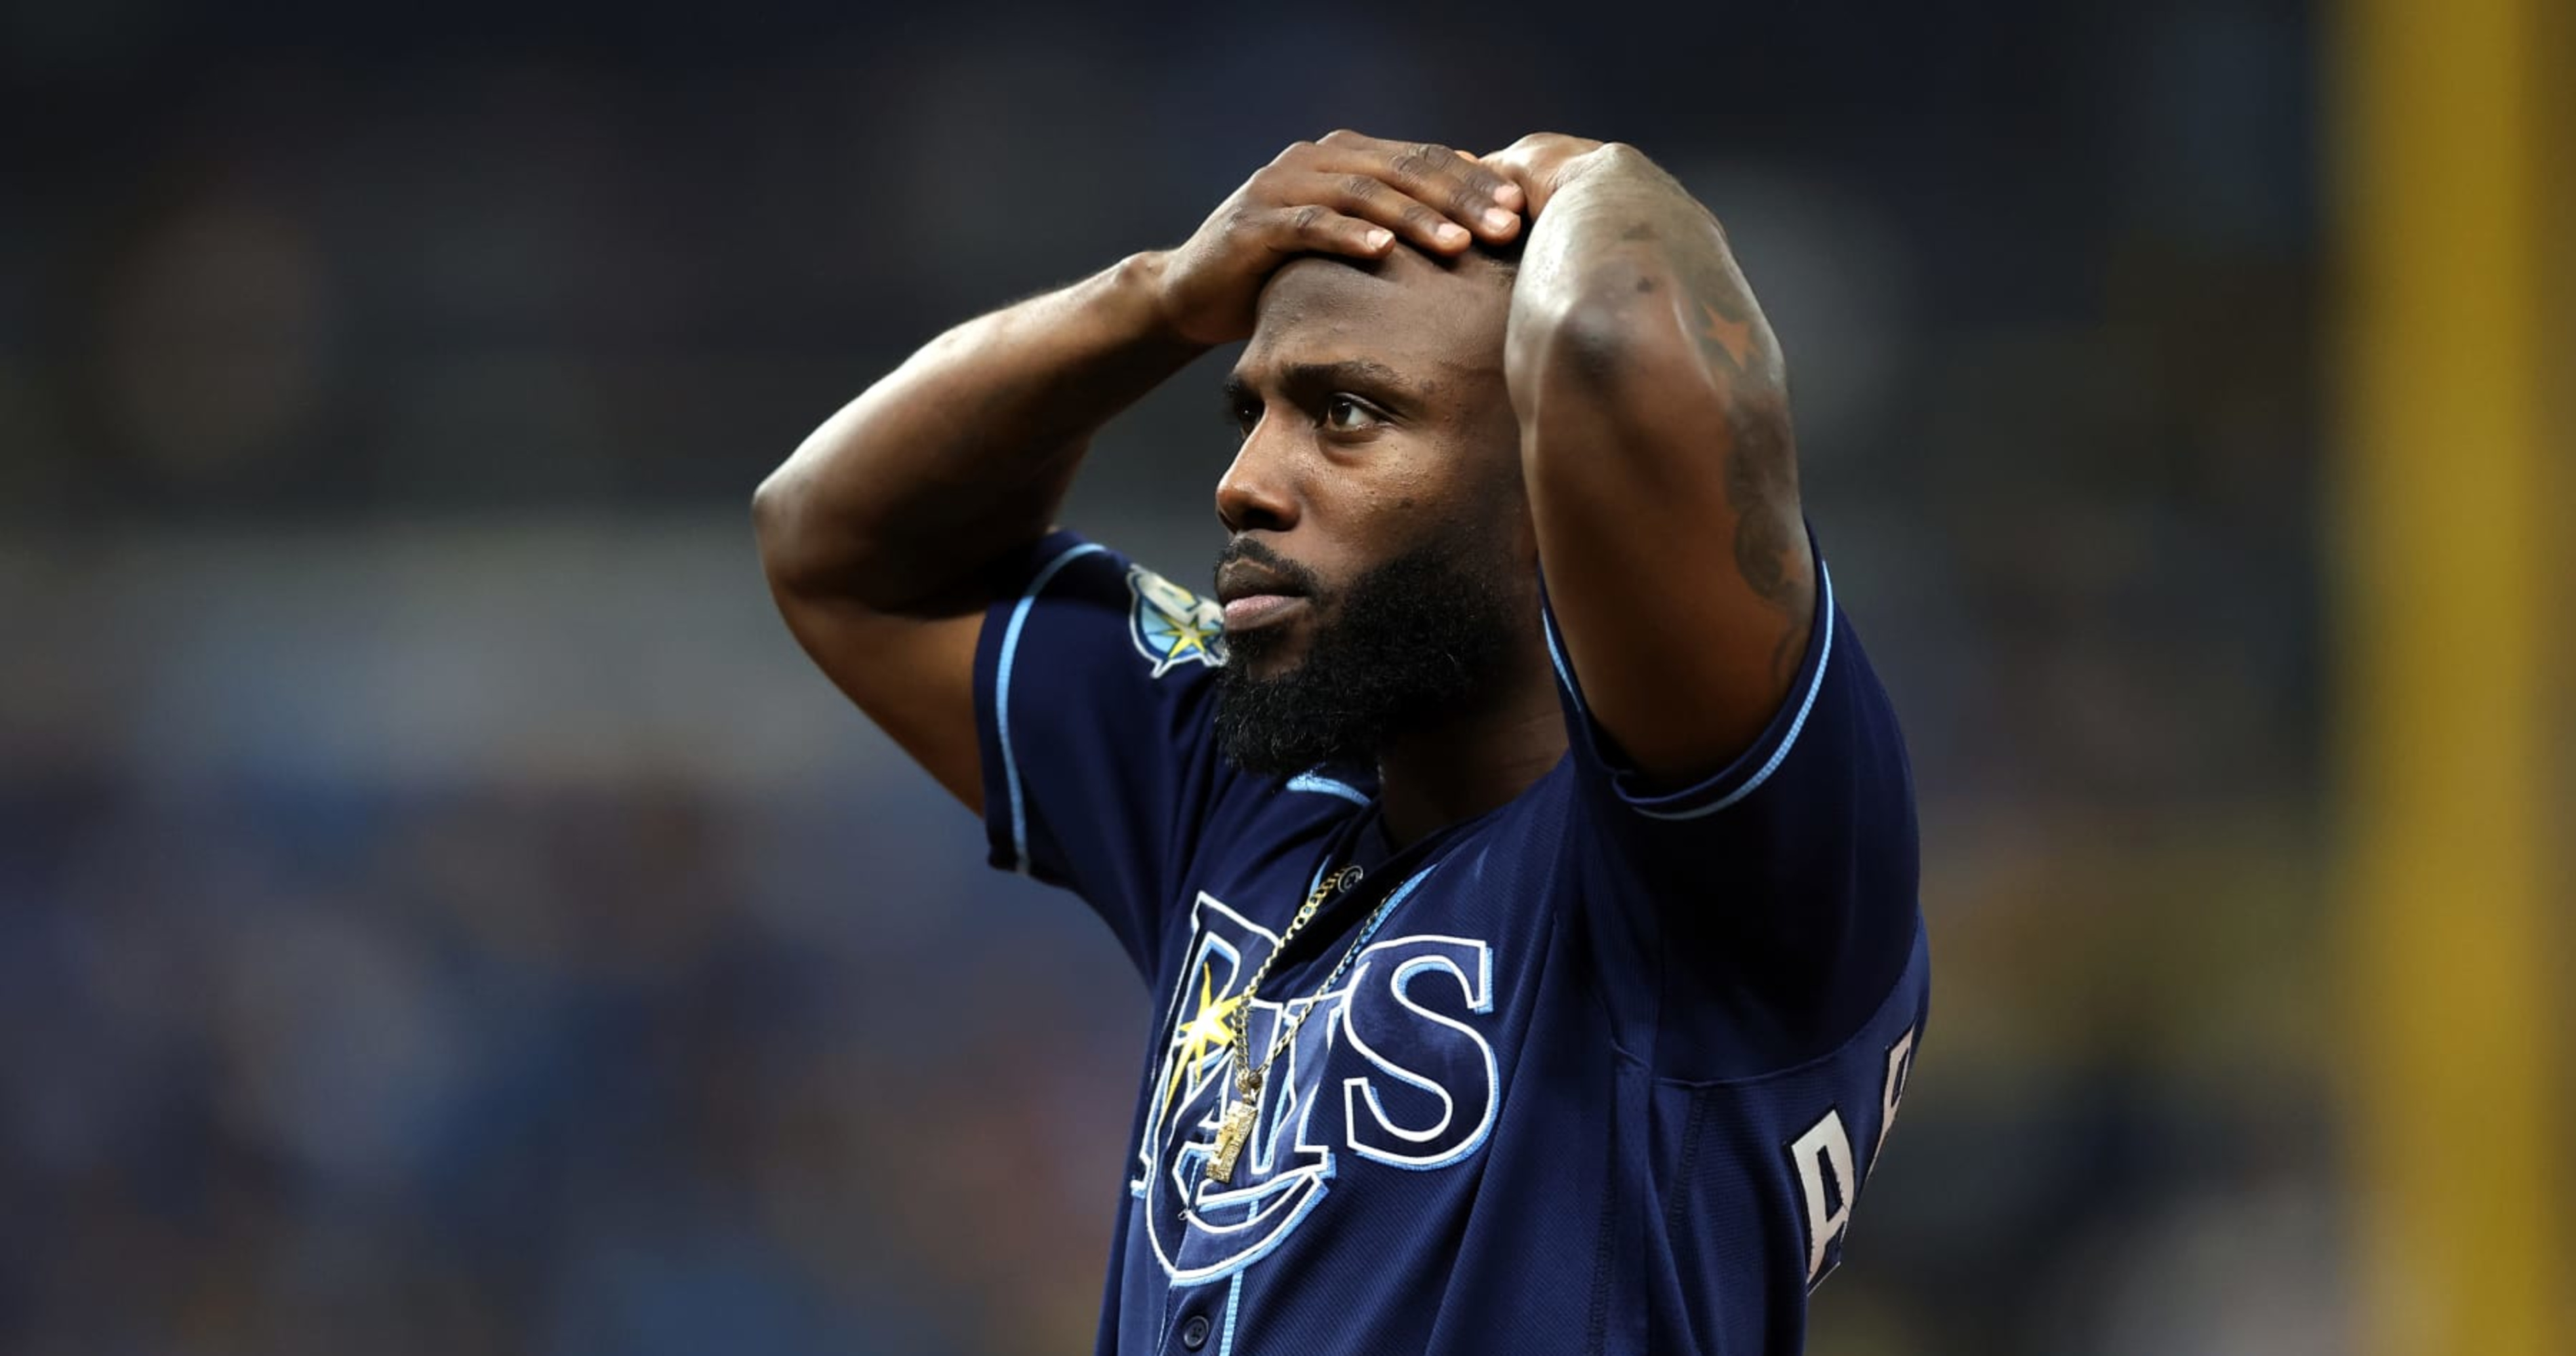 October disappointment should once again show Blue Jays what they need